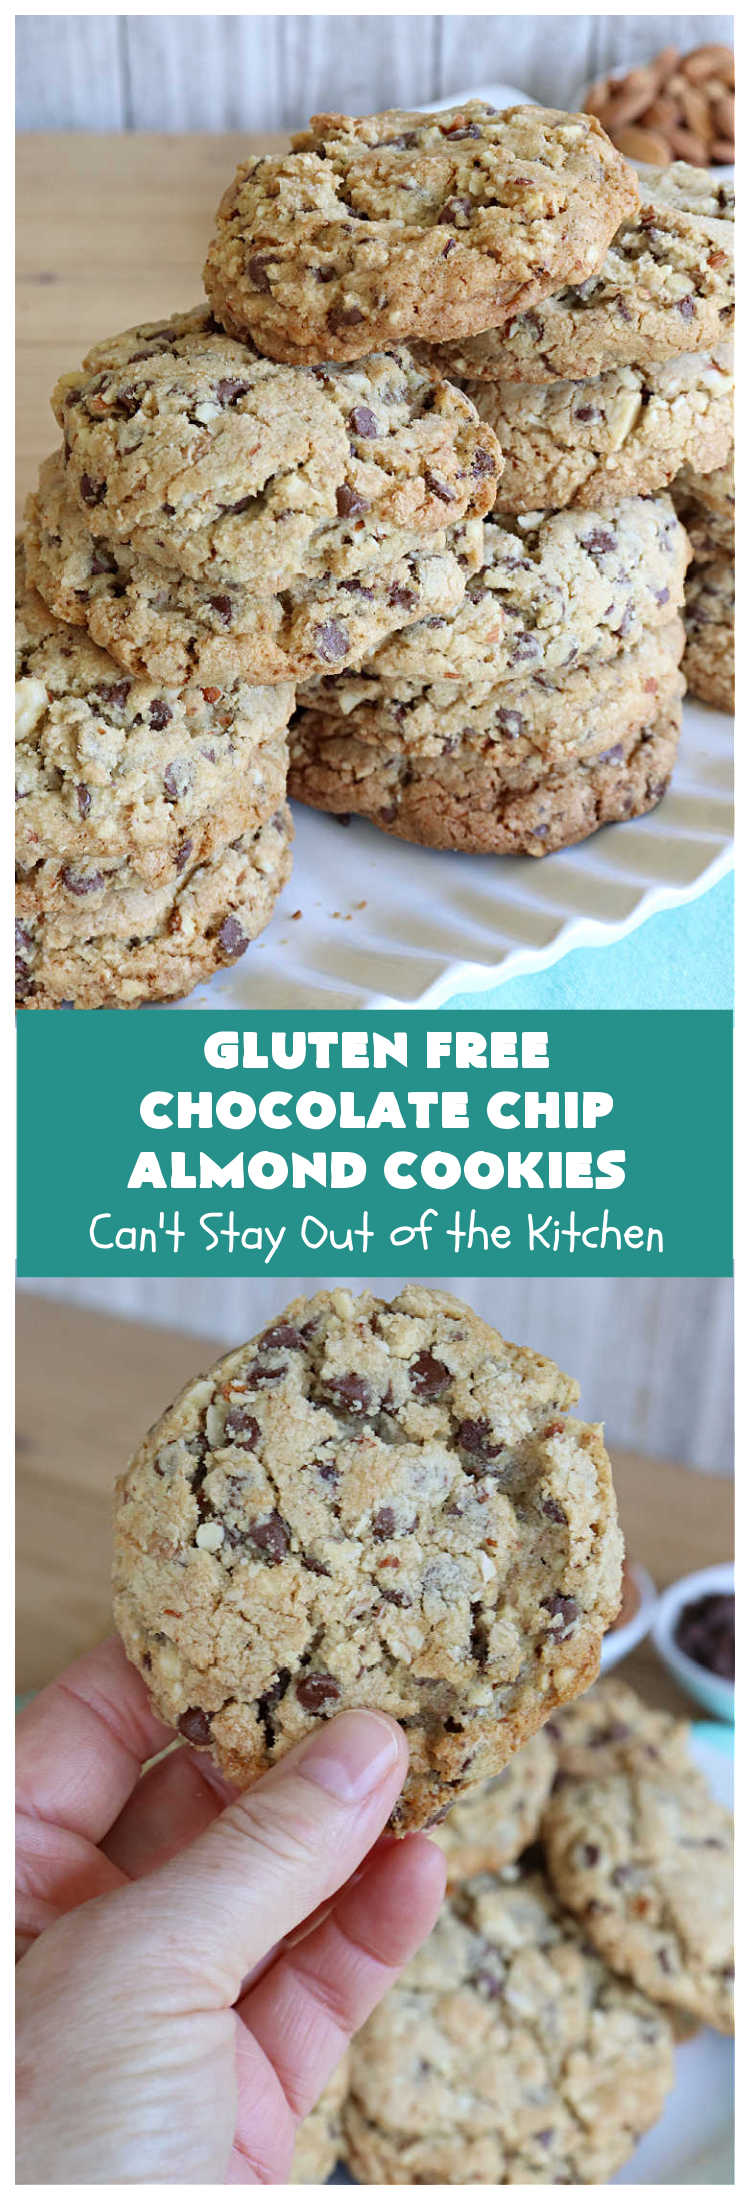 Gluten Free Chocolate Chip Almond Cookies | Can't Stay Out of the Kitchen | You'll never be able to tell these are #GlutenFree #cookies! They're filled with #almonds & #ChocolateChips & made with #Krusteaz GF flour. Excellent for #tailgating, potlucks, #HolidayBaking or a #ChristmasCookieExchange. #holiday #chocolate #dessert #GlutenFreeDessert #GlutenFreeChocolateChipAlmondCookies Gluten Free Chocolate Chip Almond Cookies | Can't Stay Out of the Kitchen | You'll never be able to tell these are #GlutenFree #cookies! They're filled with #almonds & #ChocolateChips & made with #Krusteaz GF flour. Excellent for #tailgating, potlucks, #HolidayBaking or a #ChristmasCookieExchange. #holiday #chocolate #dessert #GlutenFreeDessert #GlutenFreeChocolateChipAlmondCookies